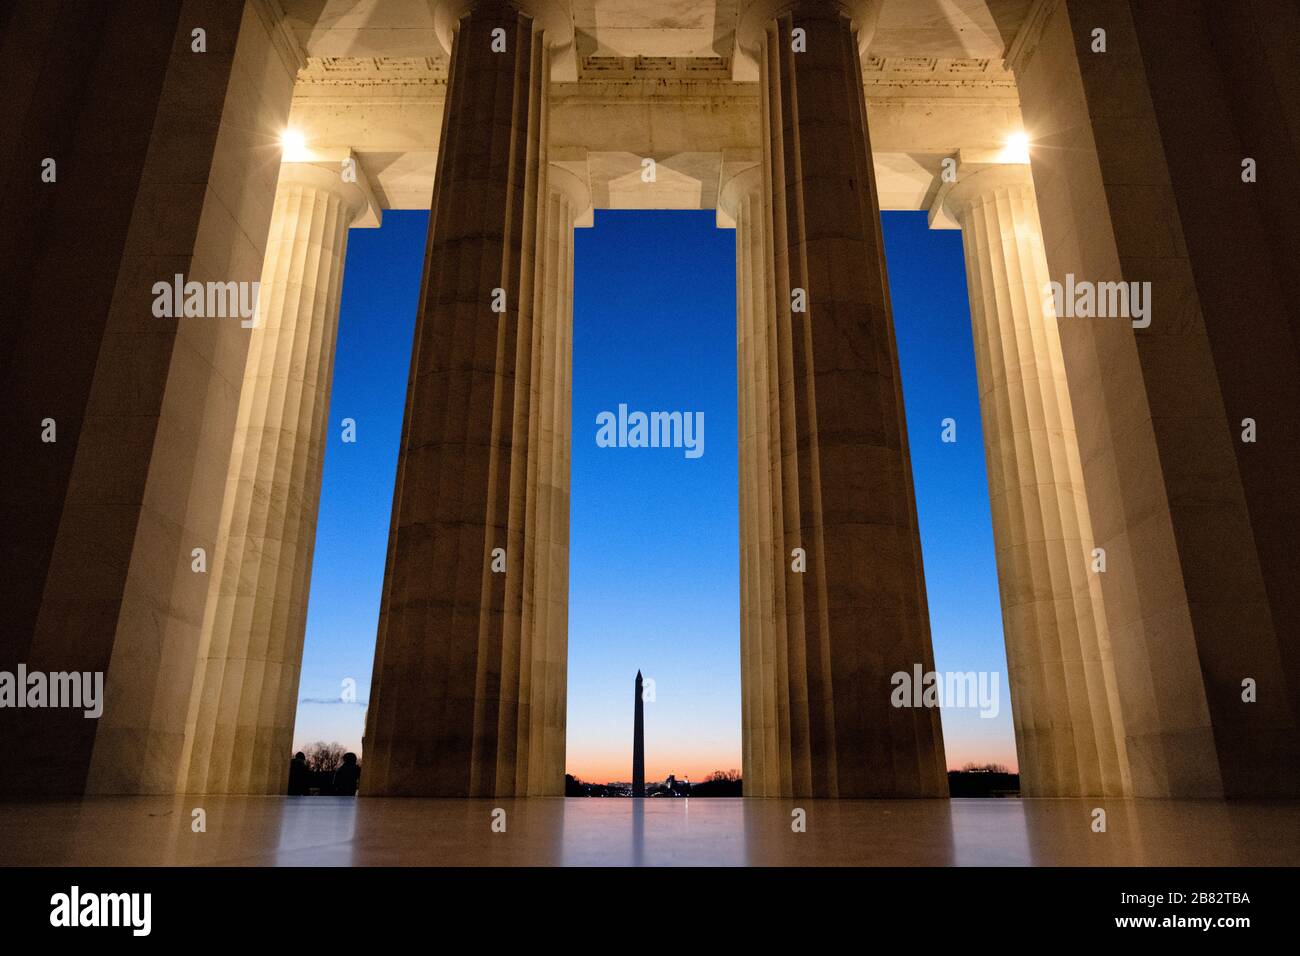 WASHINGTON, DC - A view from inside the main chamber of the Lincoln Memorial, looking out through the massive columns towards the Washington Monument just before sunrise. Stock Photo